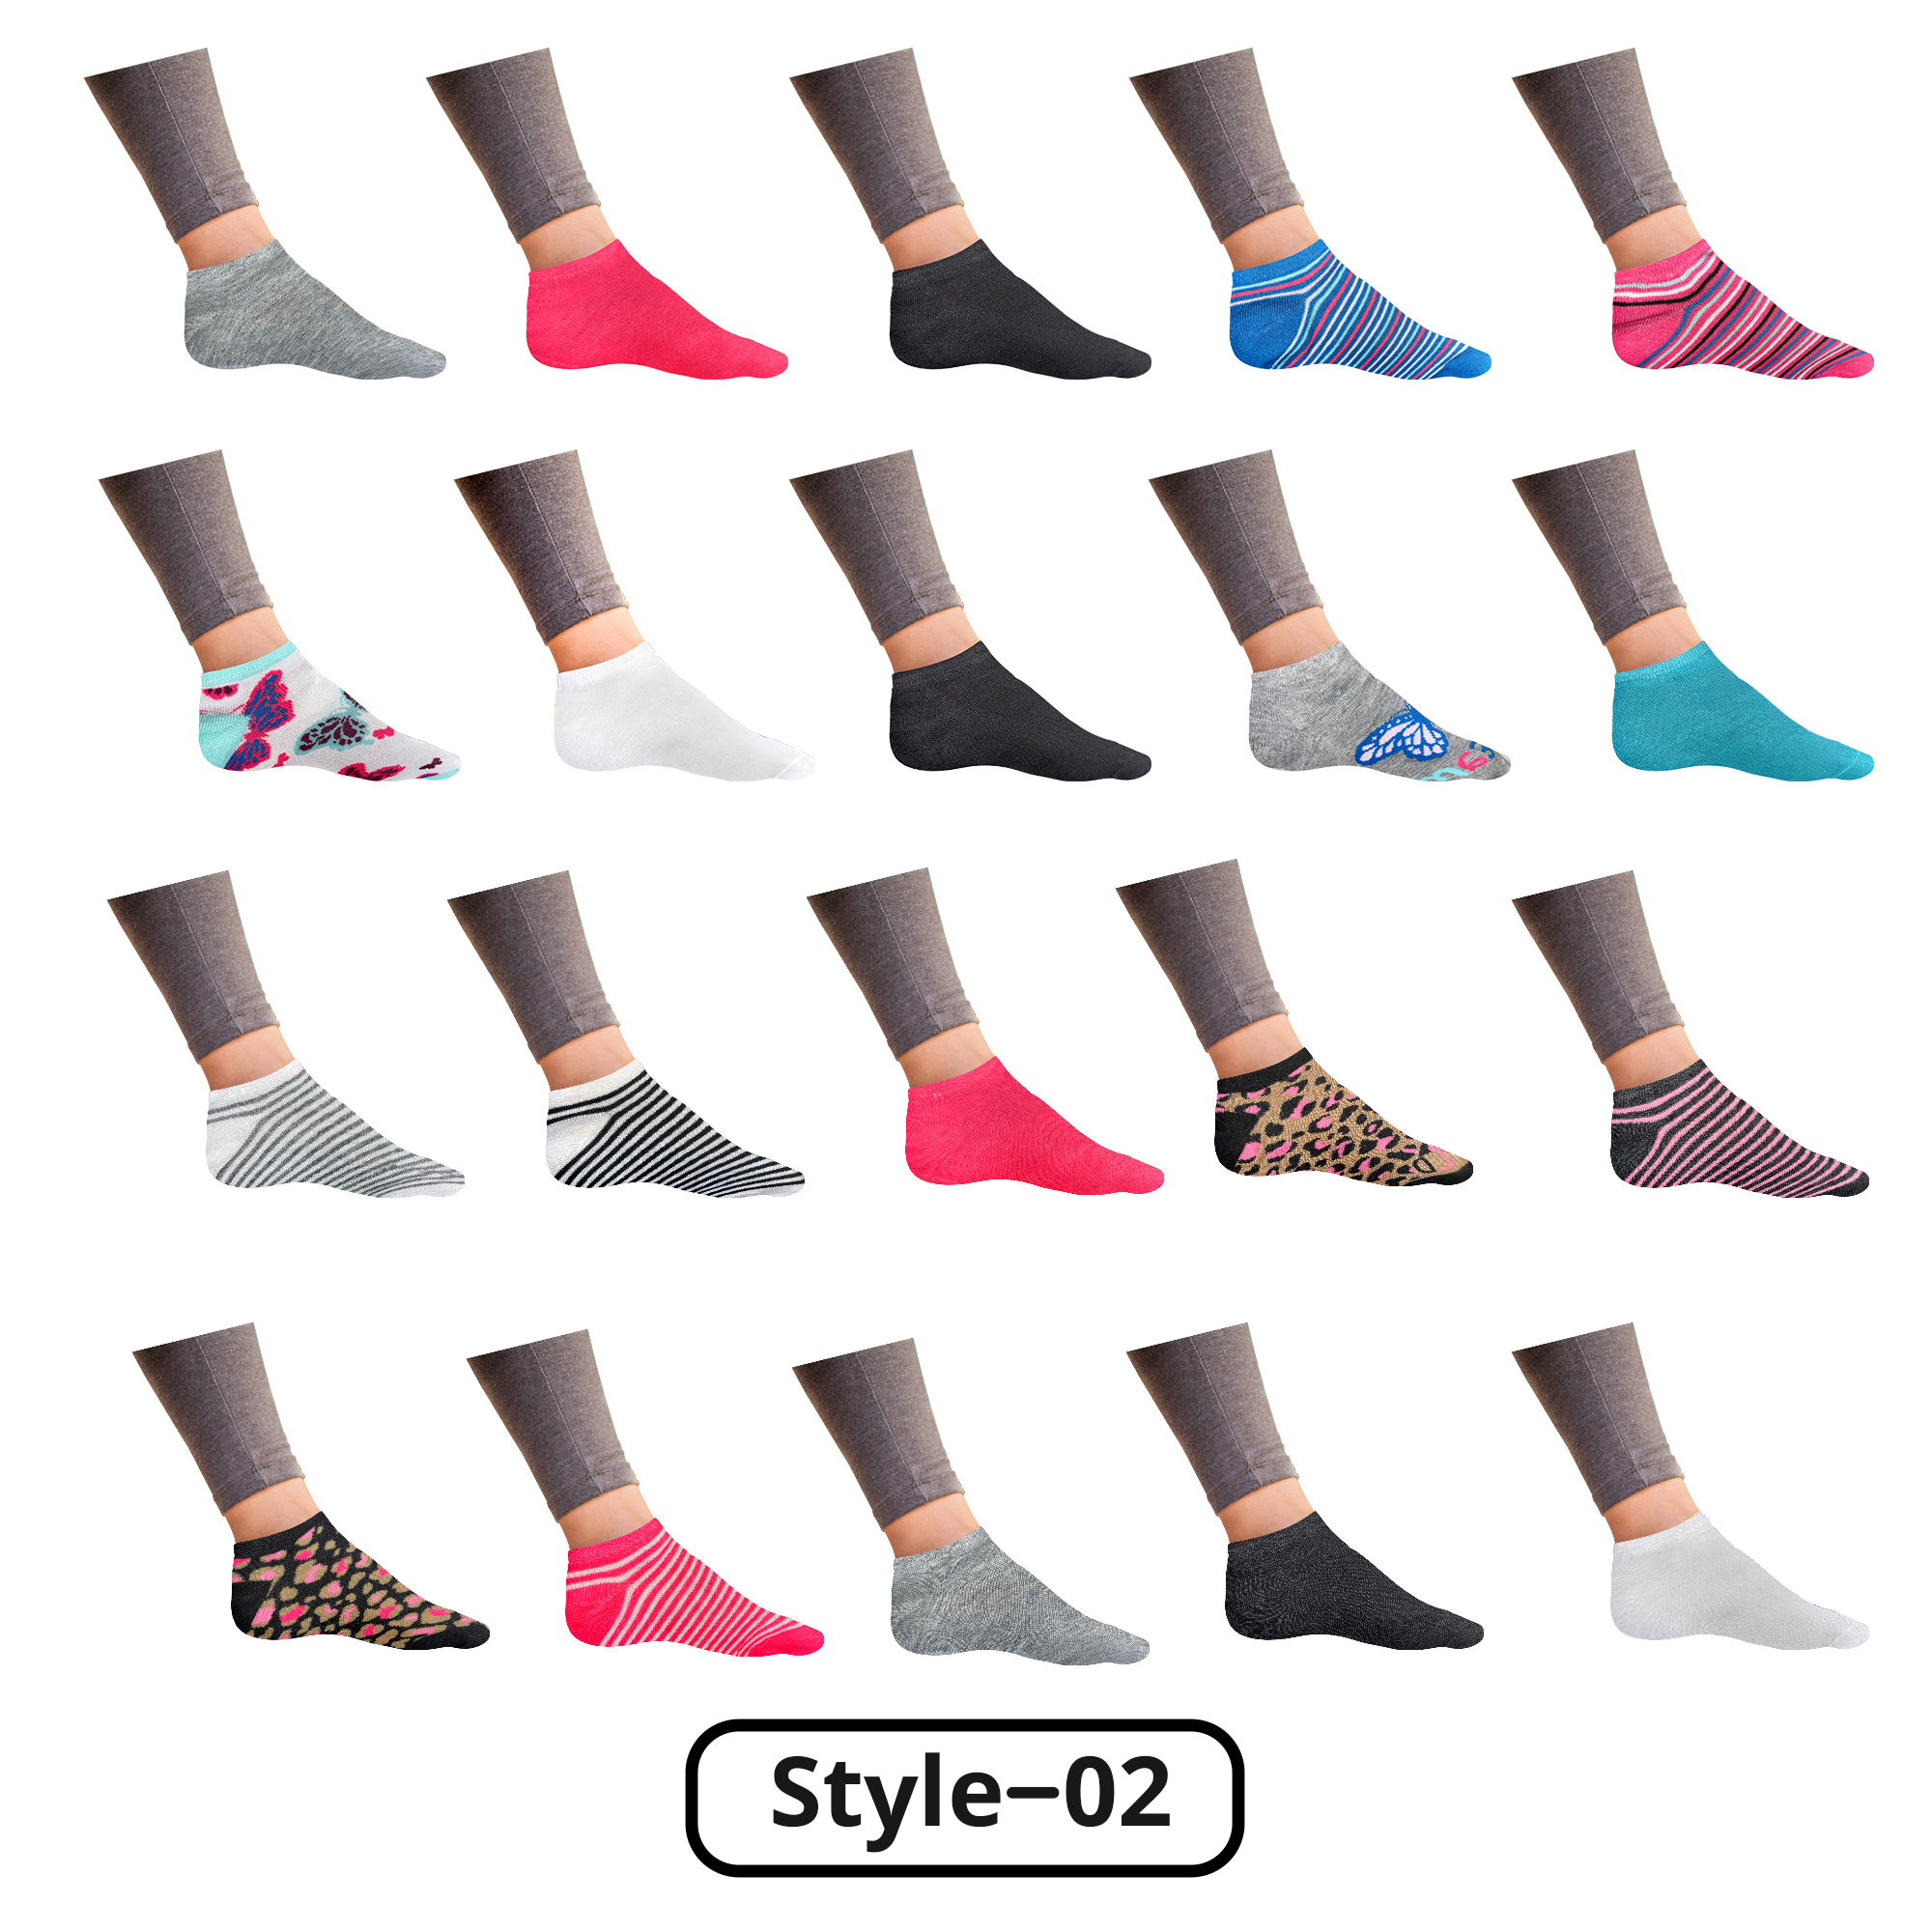 20-Pairs: Women’s Breathable Stylish Colorful Fun No Show Low Cut Ankle Socks - Style 11